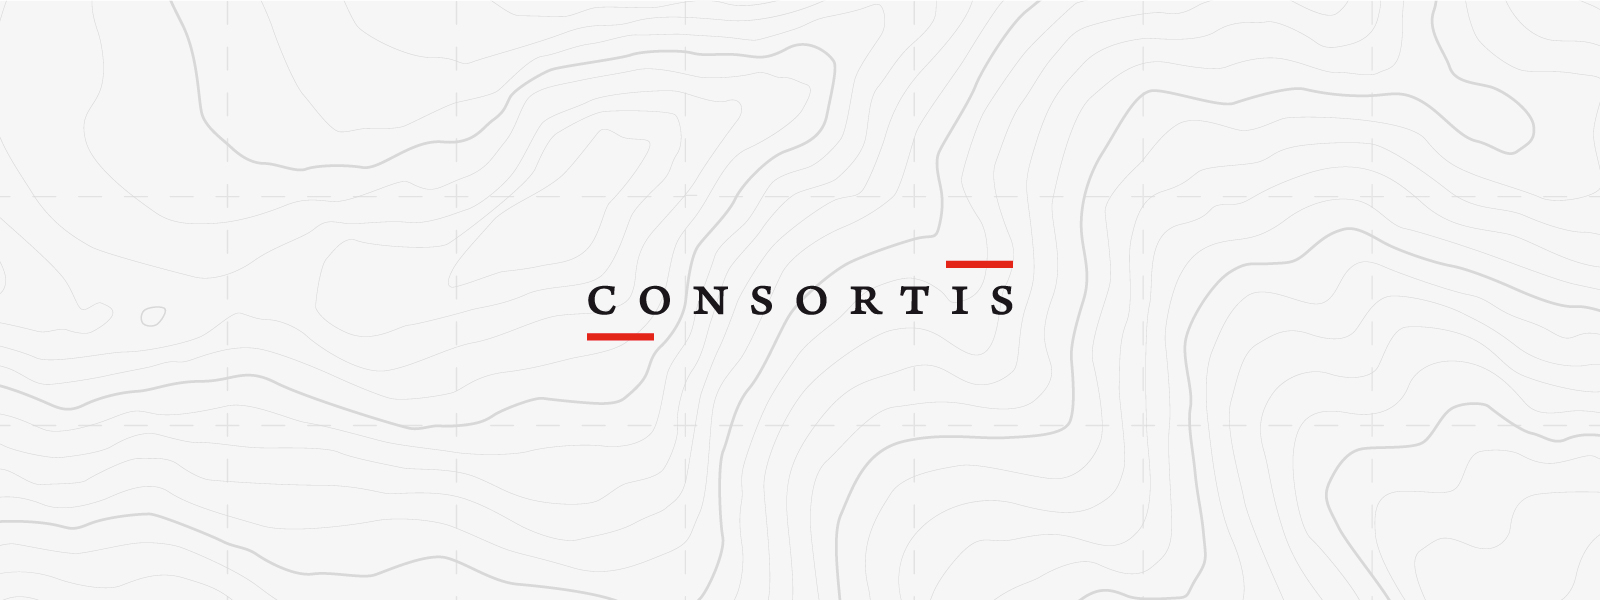 Projects default banner, consortis logo